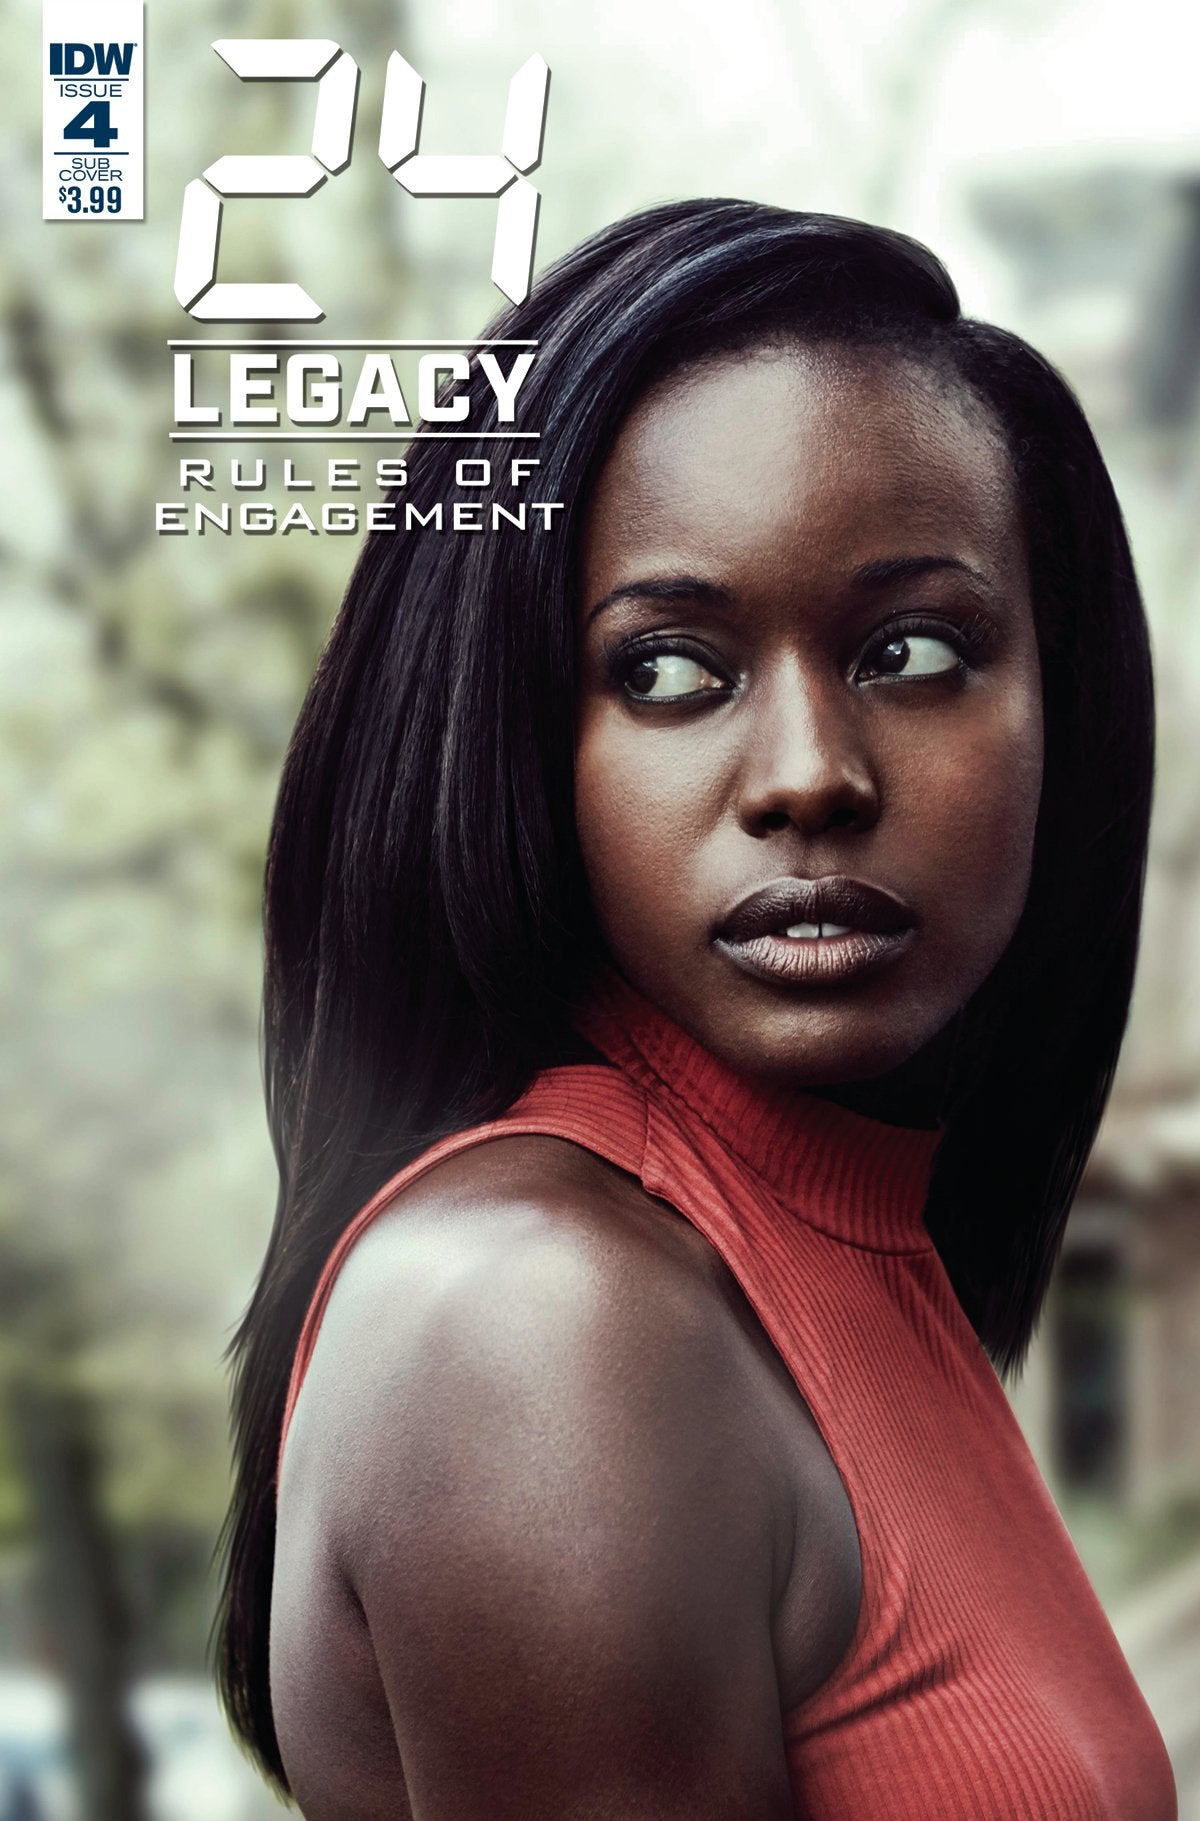 24 LEGACY RULES OF ENGAGEMENT #4 (OF 5) CVR B PHOTO COVER